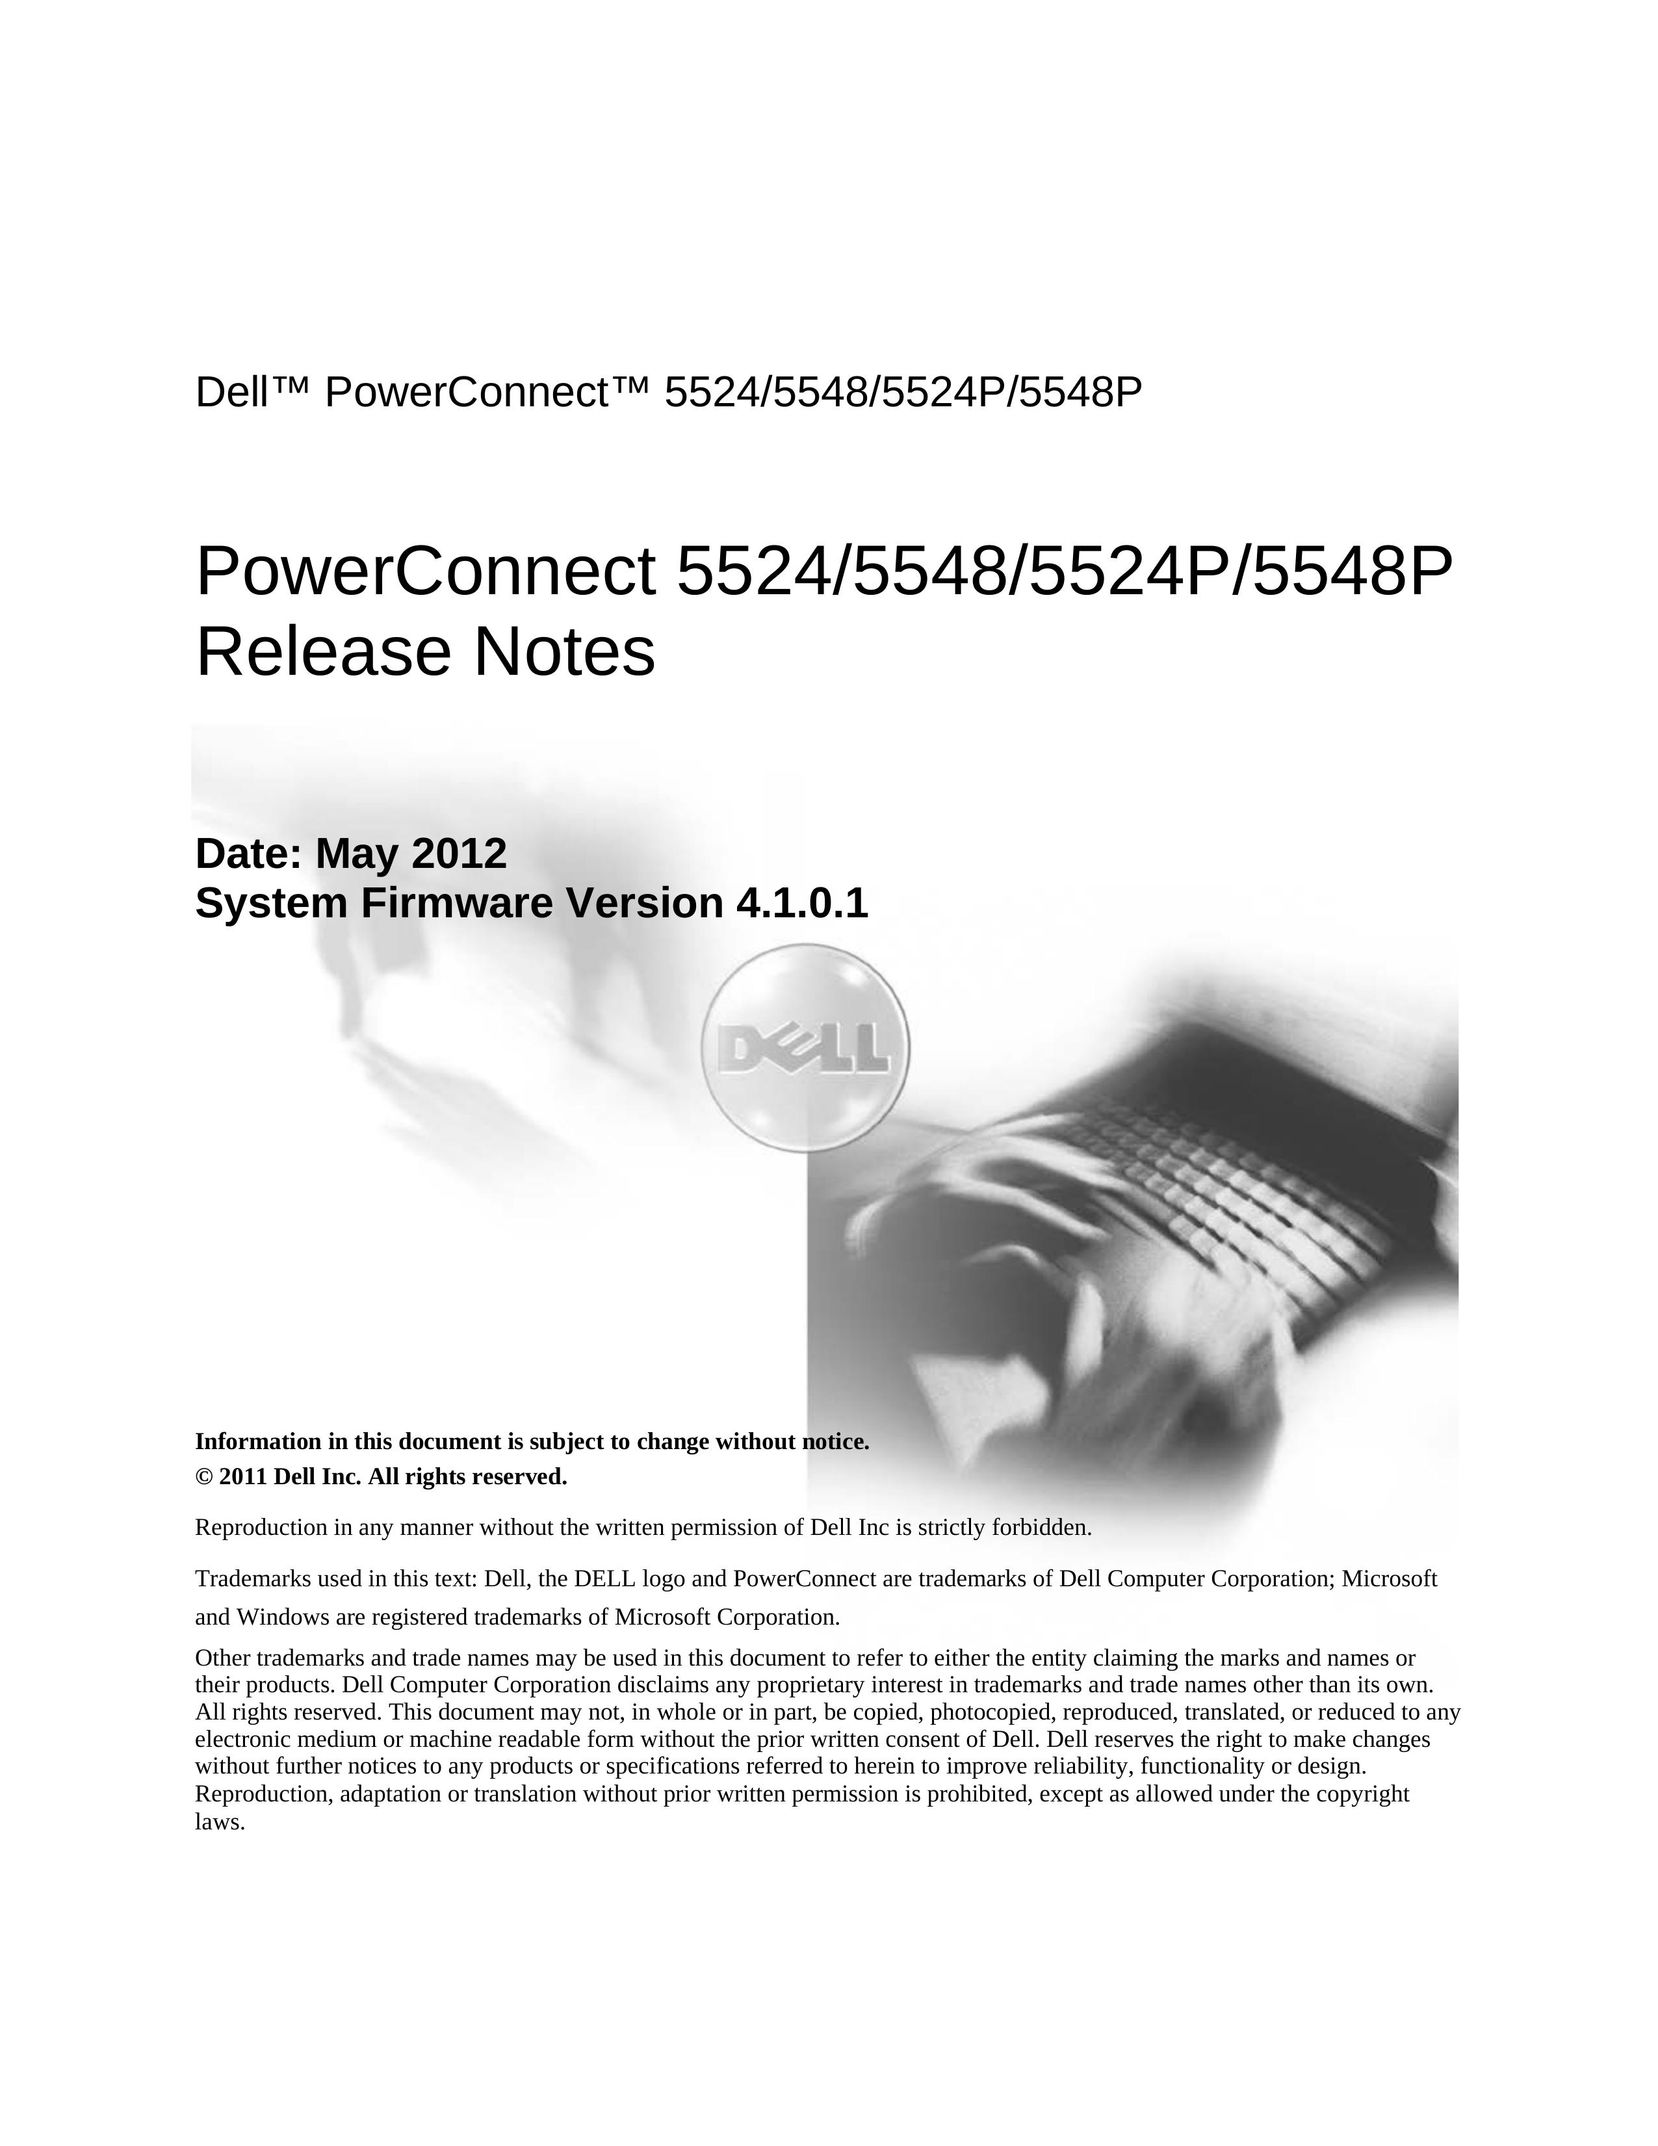 Dell 5548P Switch User Manual